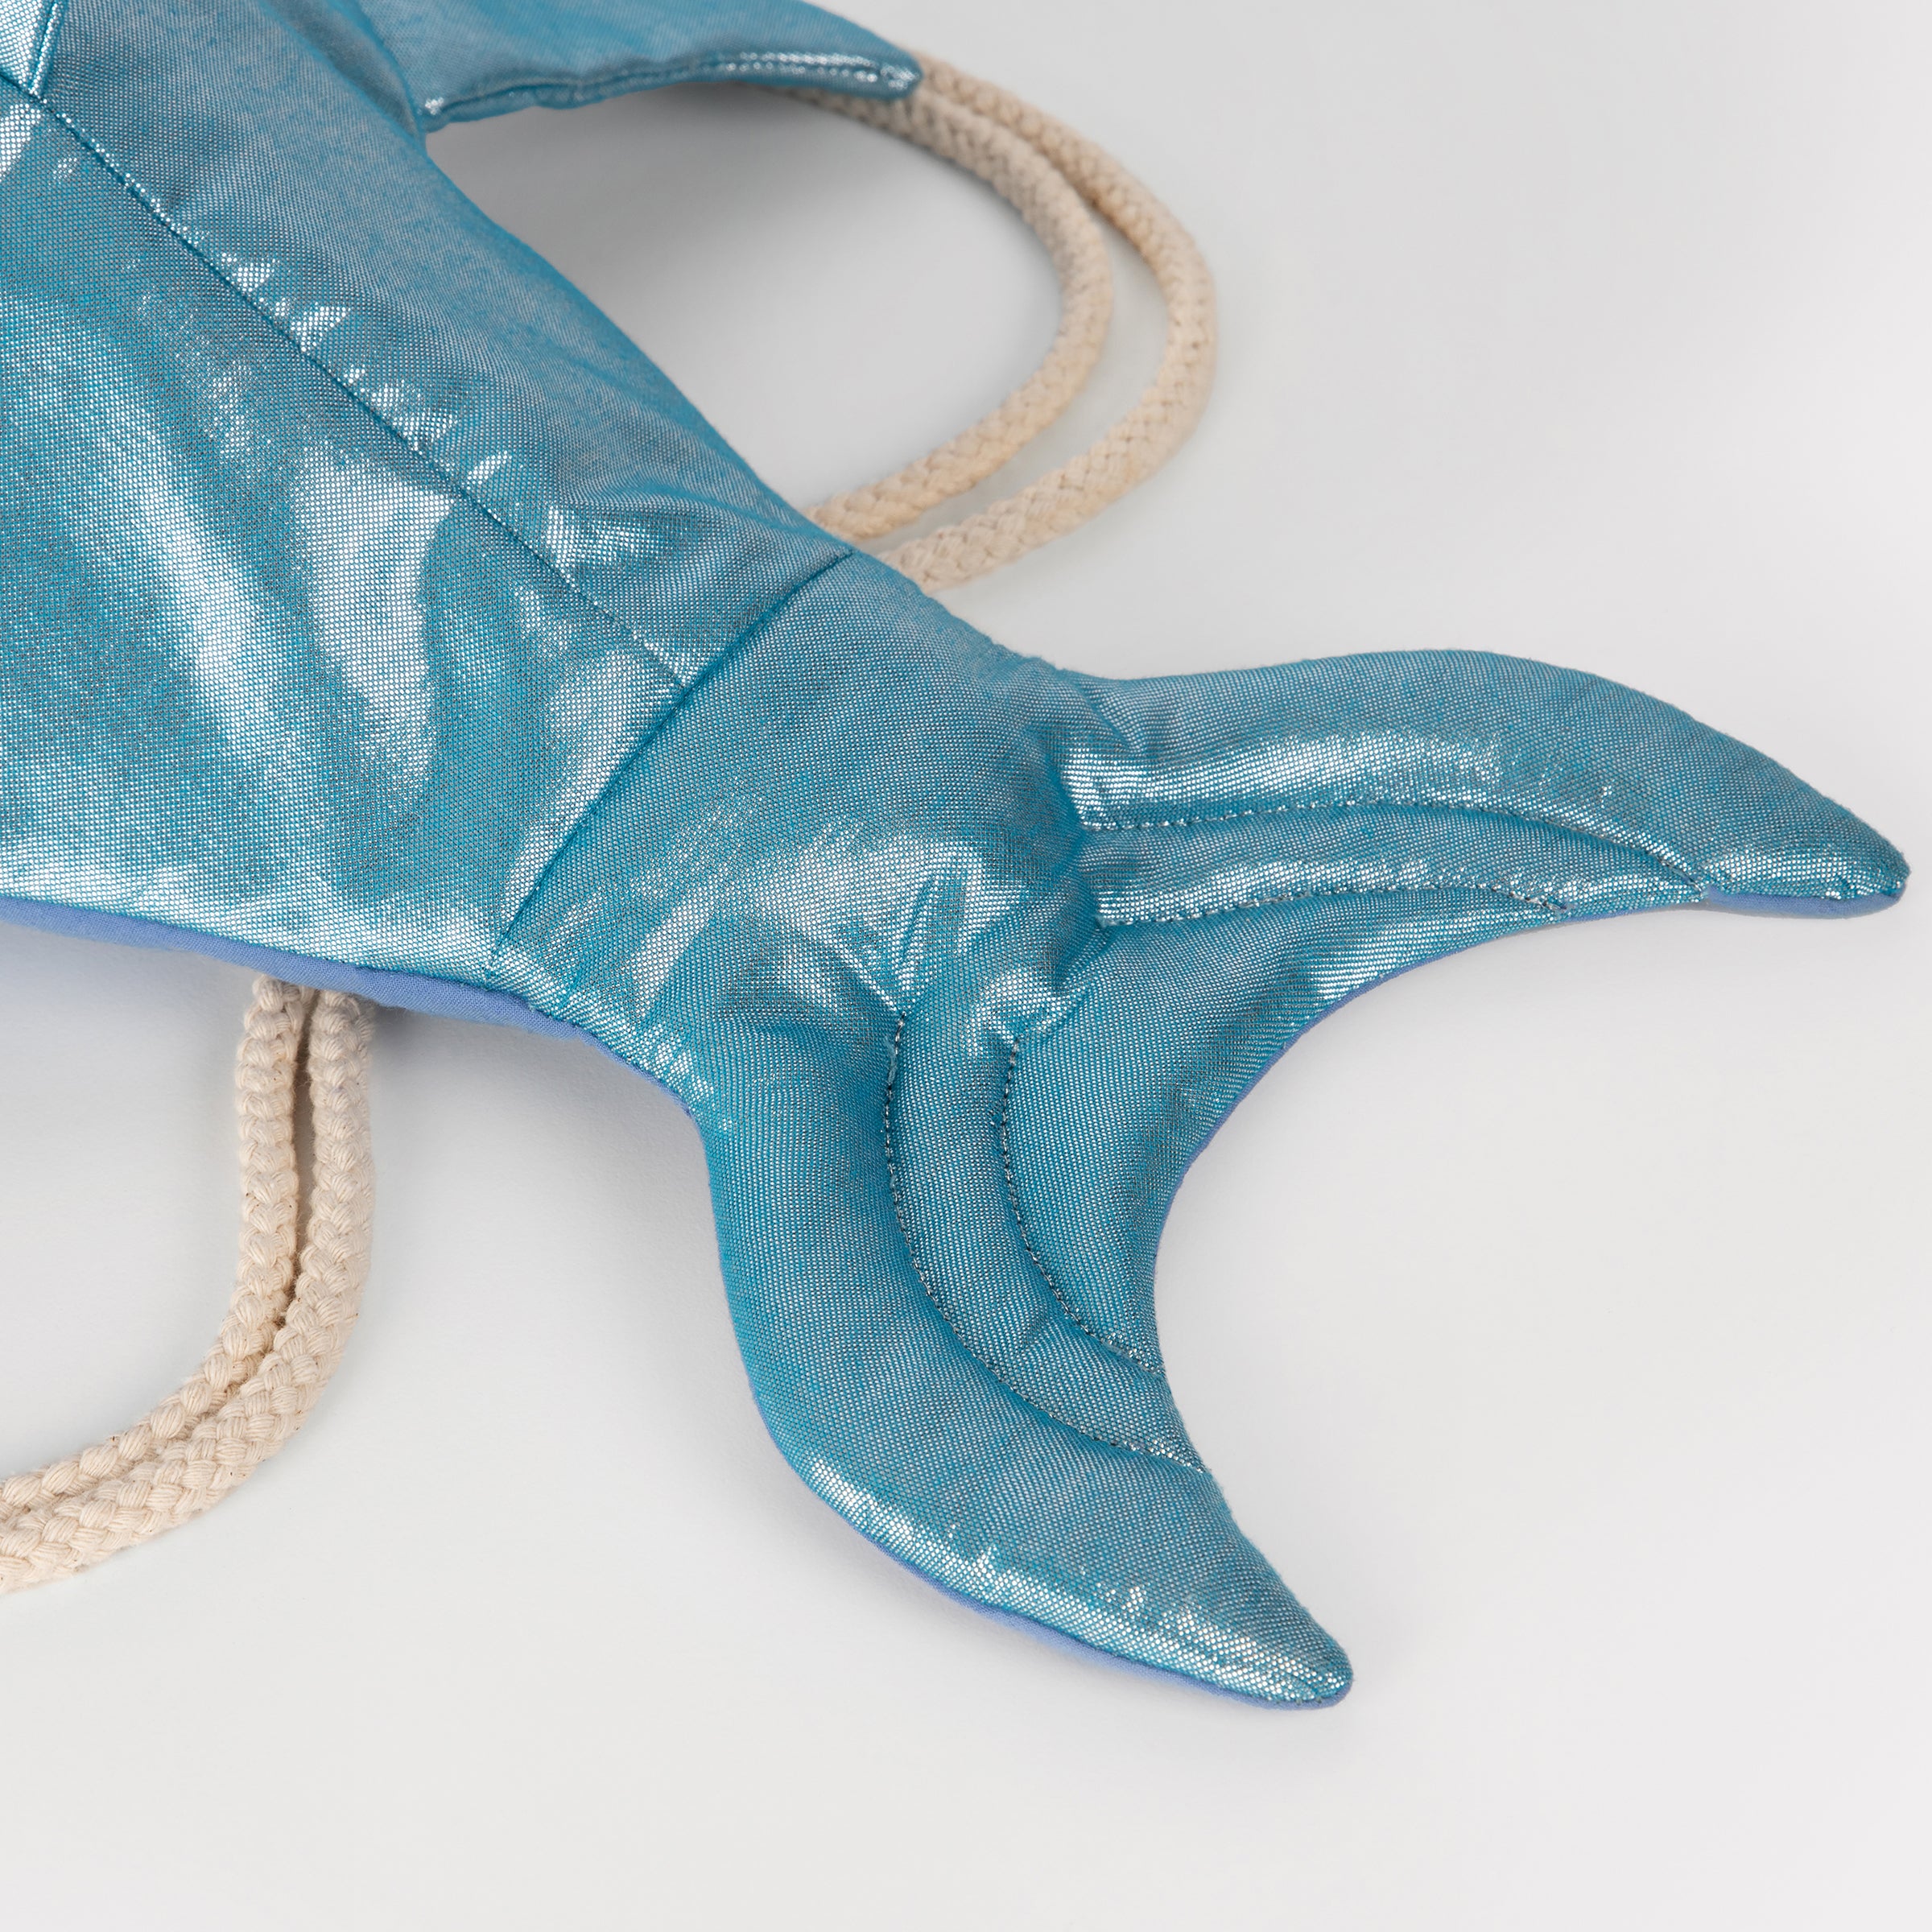 This shiny shark is  a backpack crafted from blue lamé fabric with a cotton lining and cord straps.